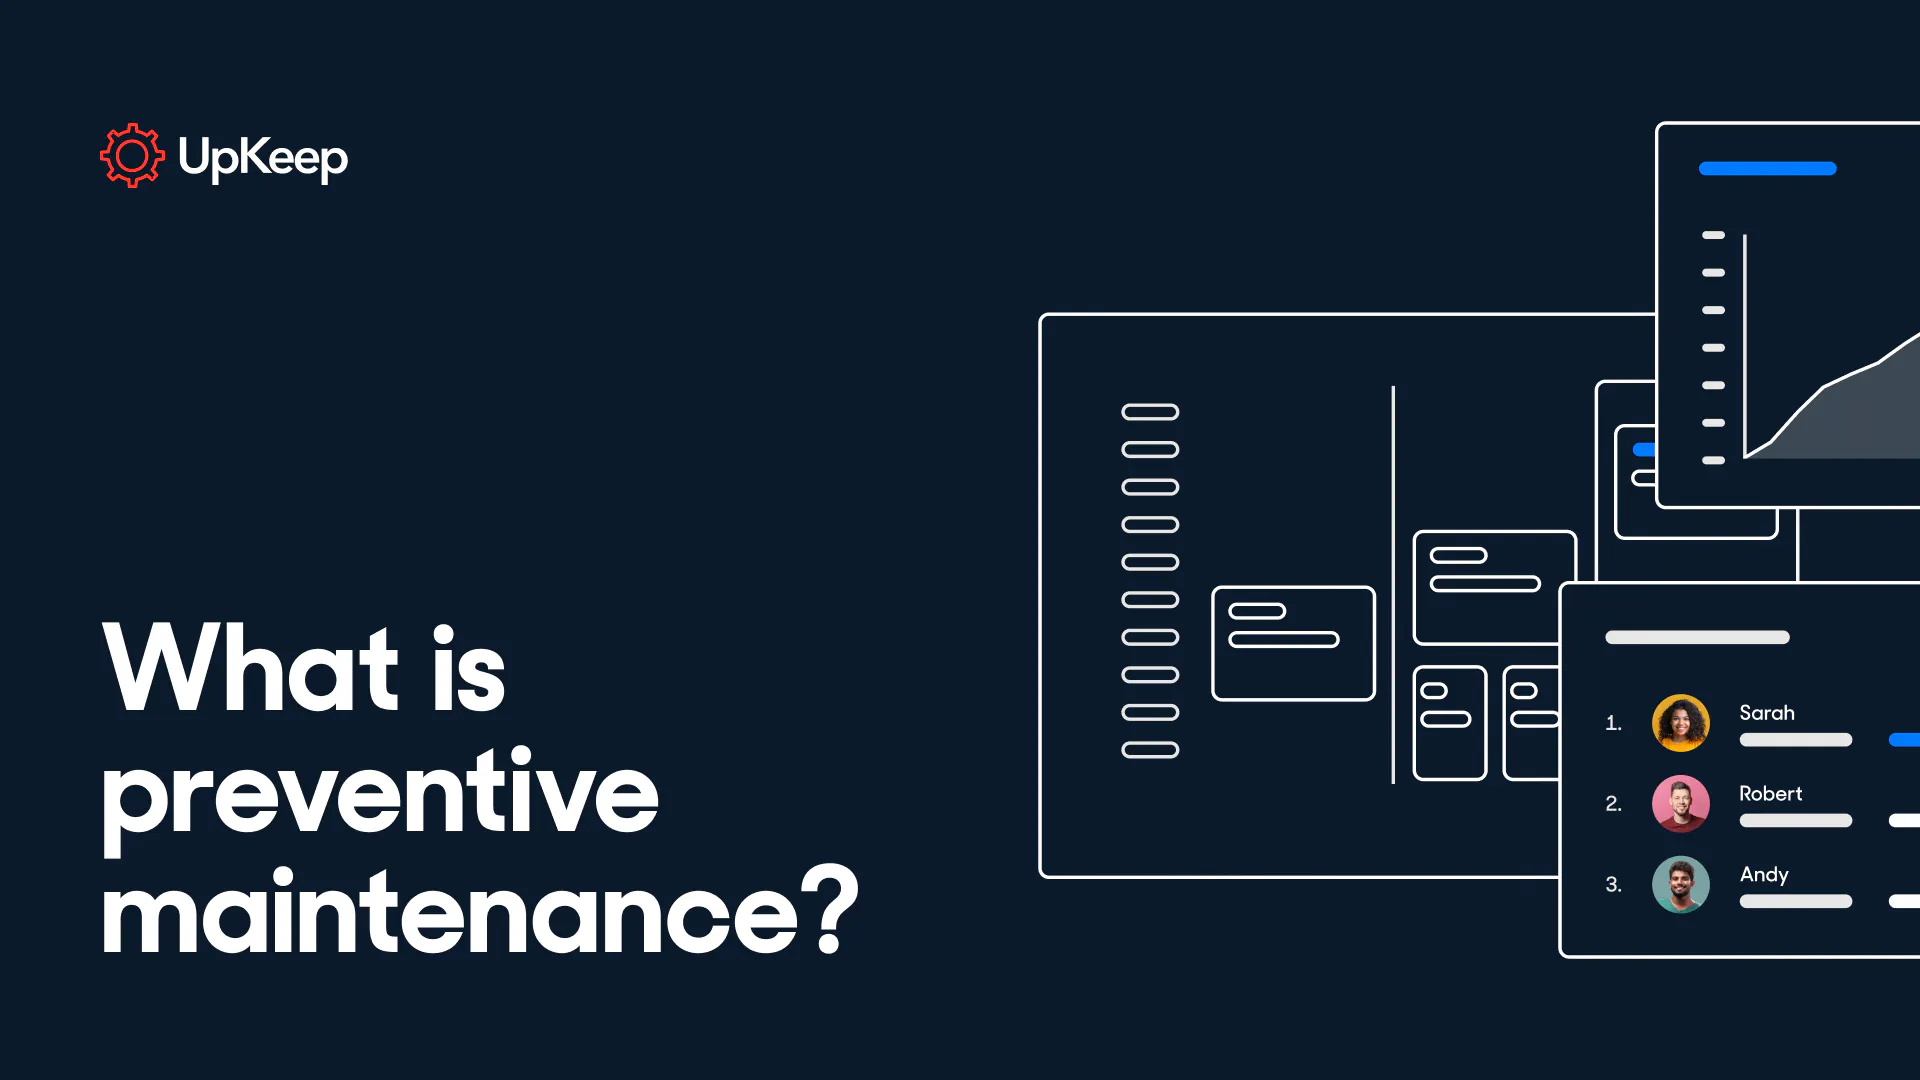 What is preventive maintenance?